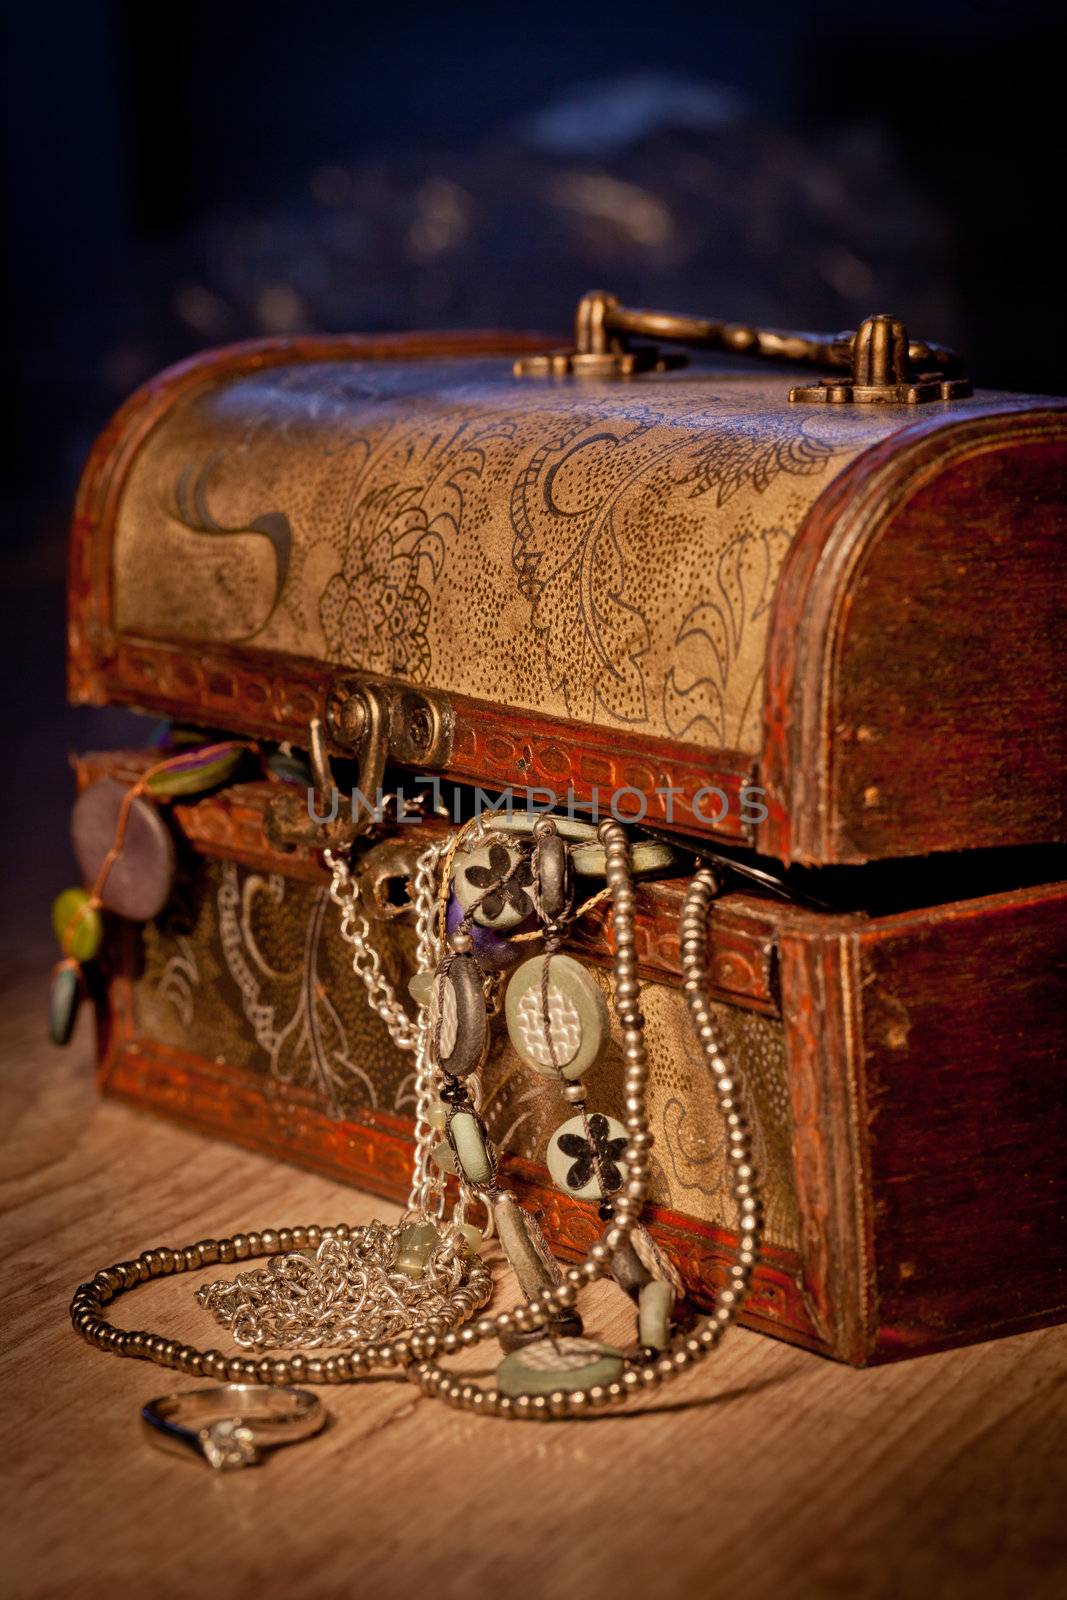 Coffer with jewels by sabinoparente